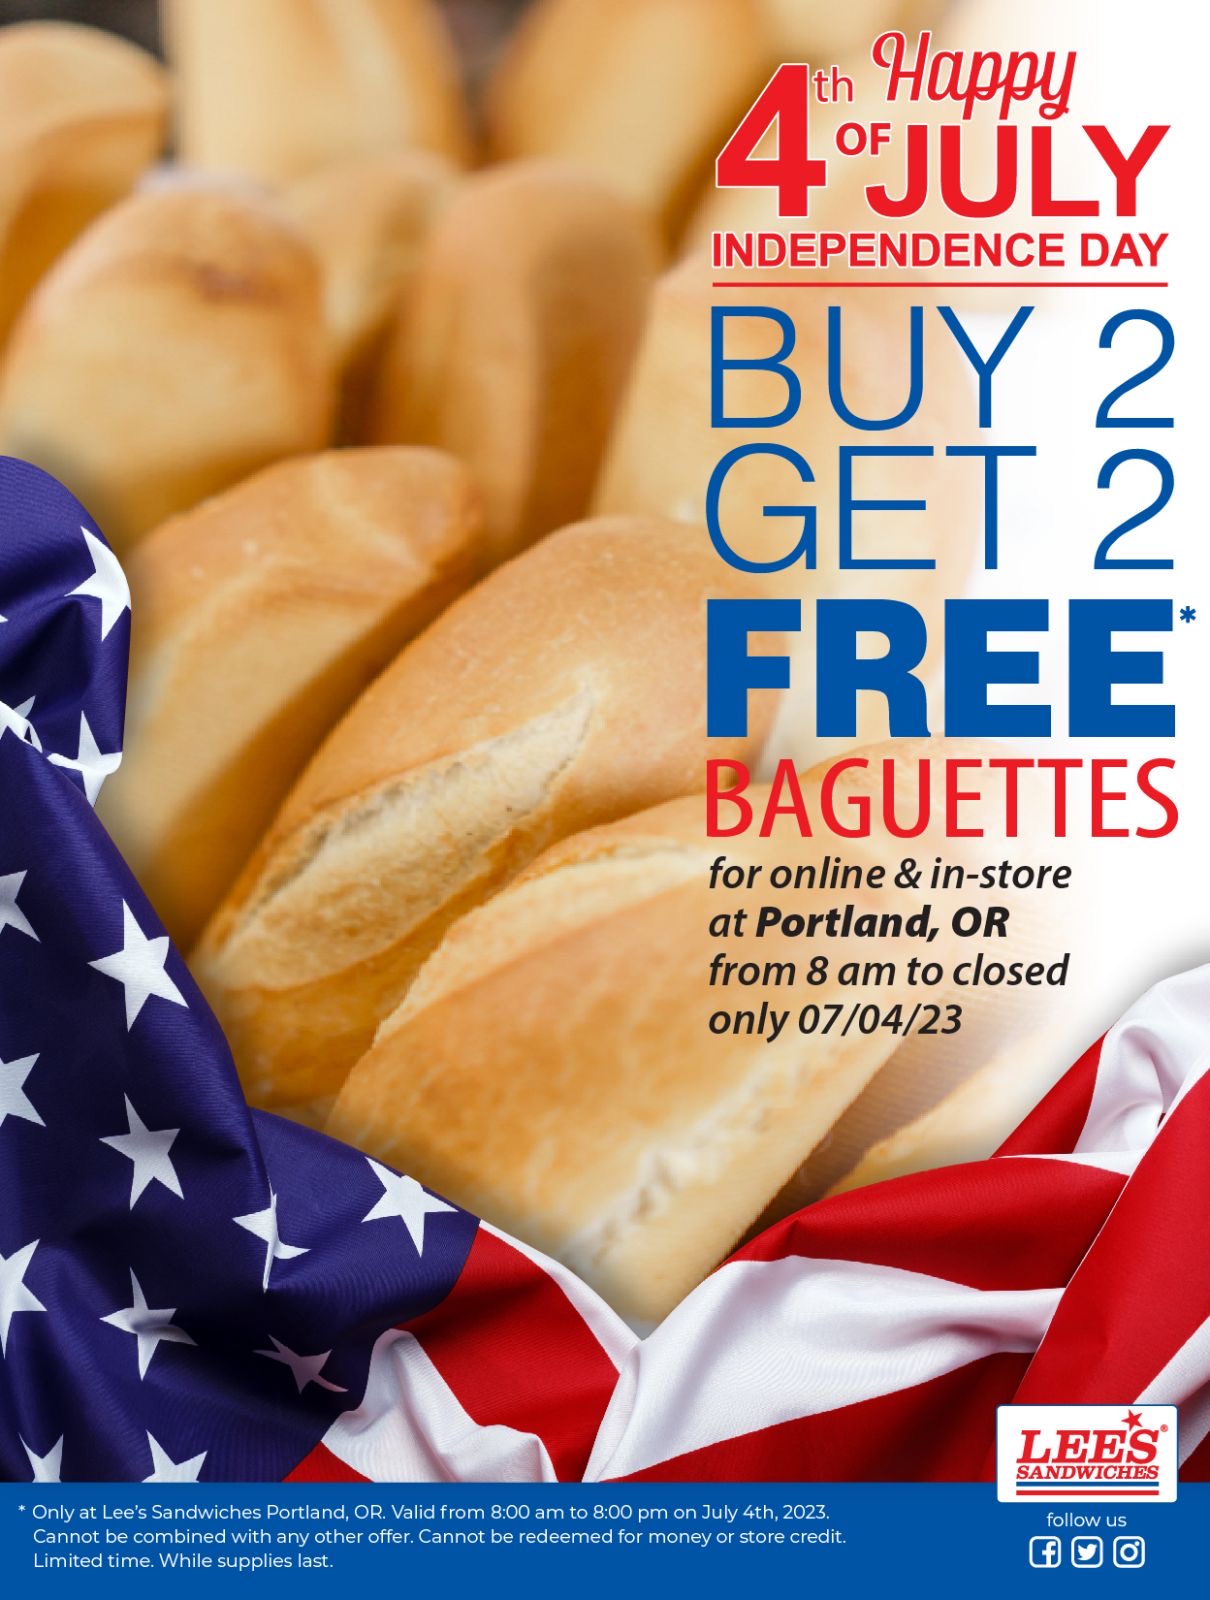 Happy July 4th! Let's celebrate with our both in-store & online special deals. Only 7/4/2023 at participating locations